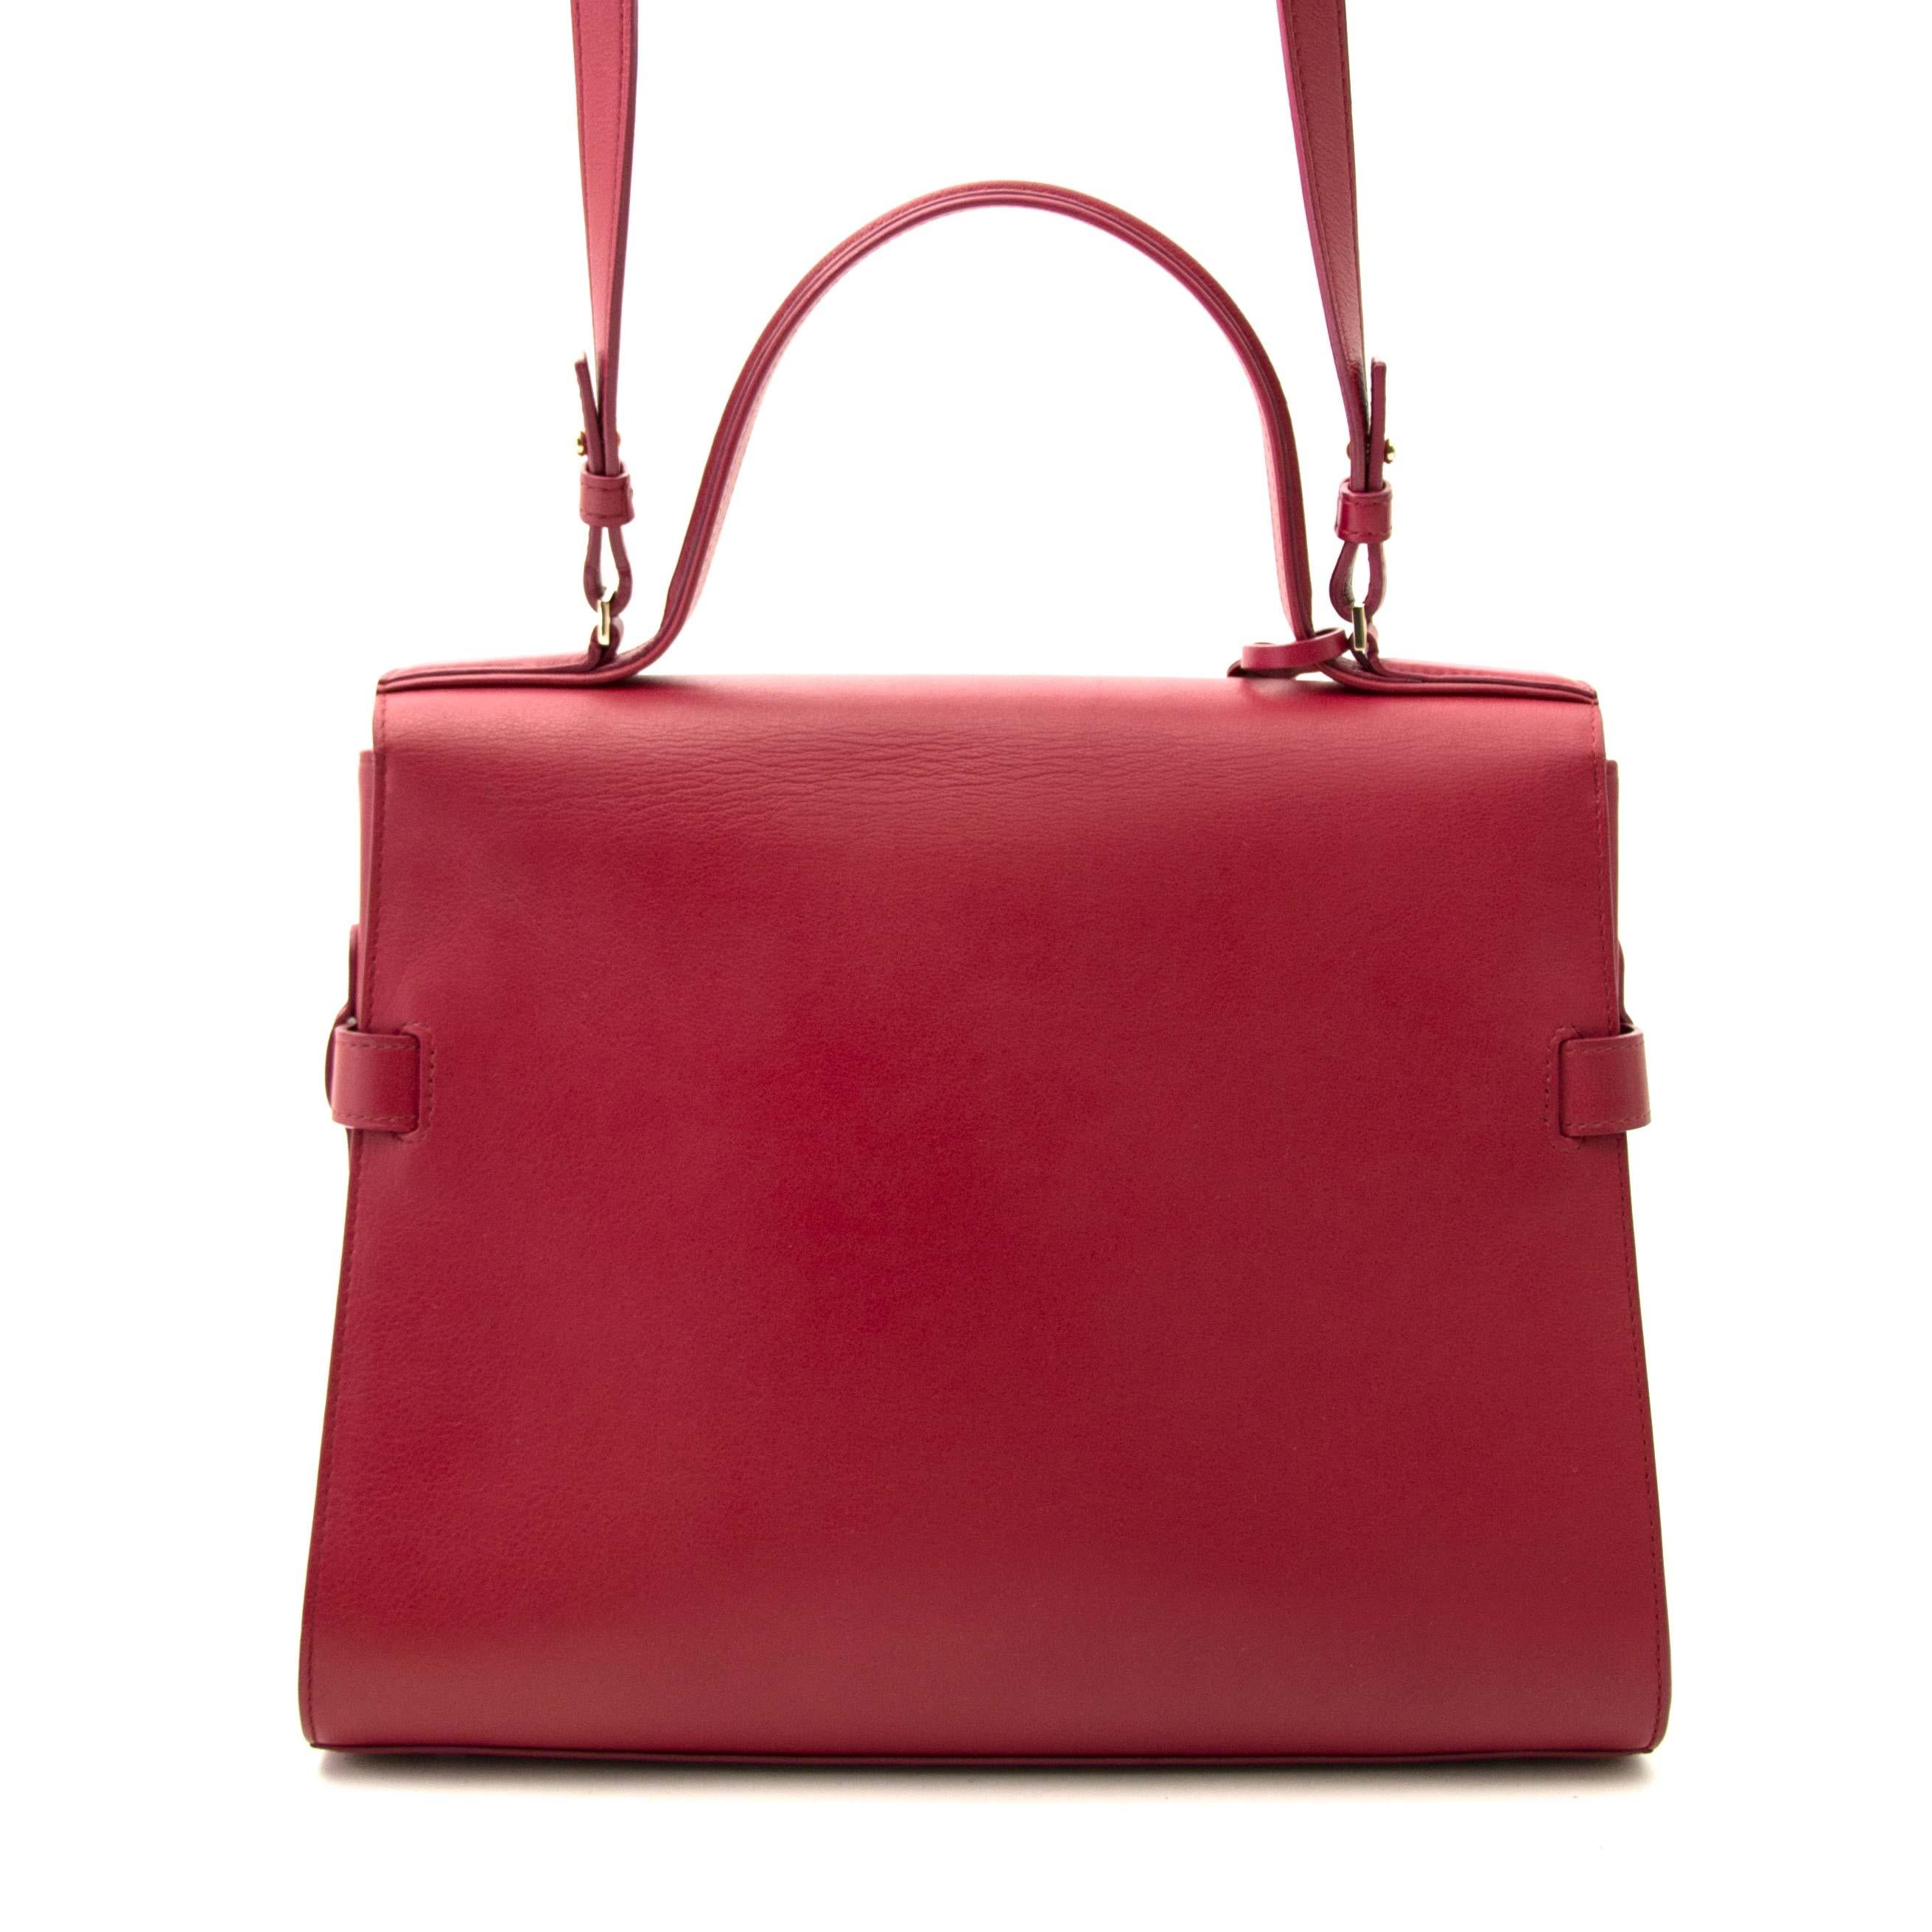 Excellent condition

Delvaux Tempete GM Framboise

Iconic Delvaux tempete in framboise supple grained calfskin.
With its gold toned hardware and geometric shape, this beauty is one of Delvaux's most architectural bags.T
The bag has the perfect size